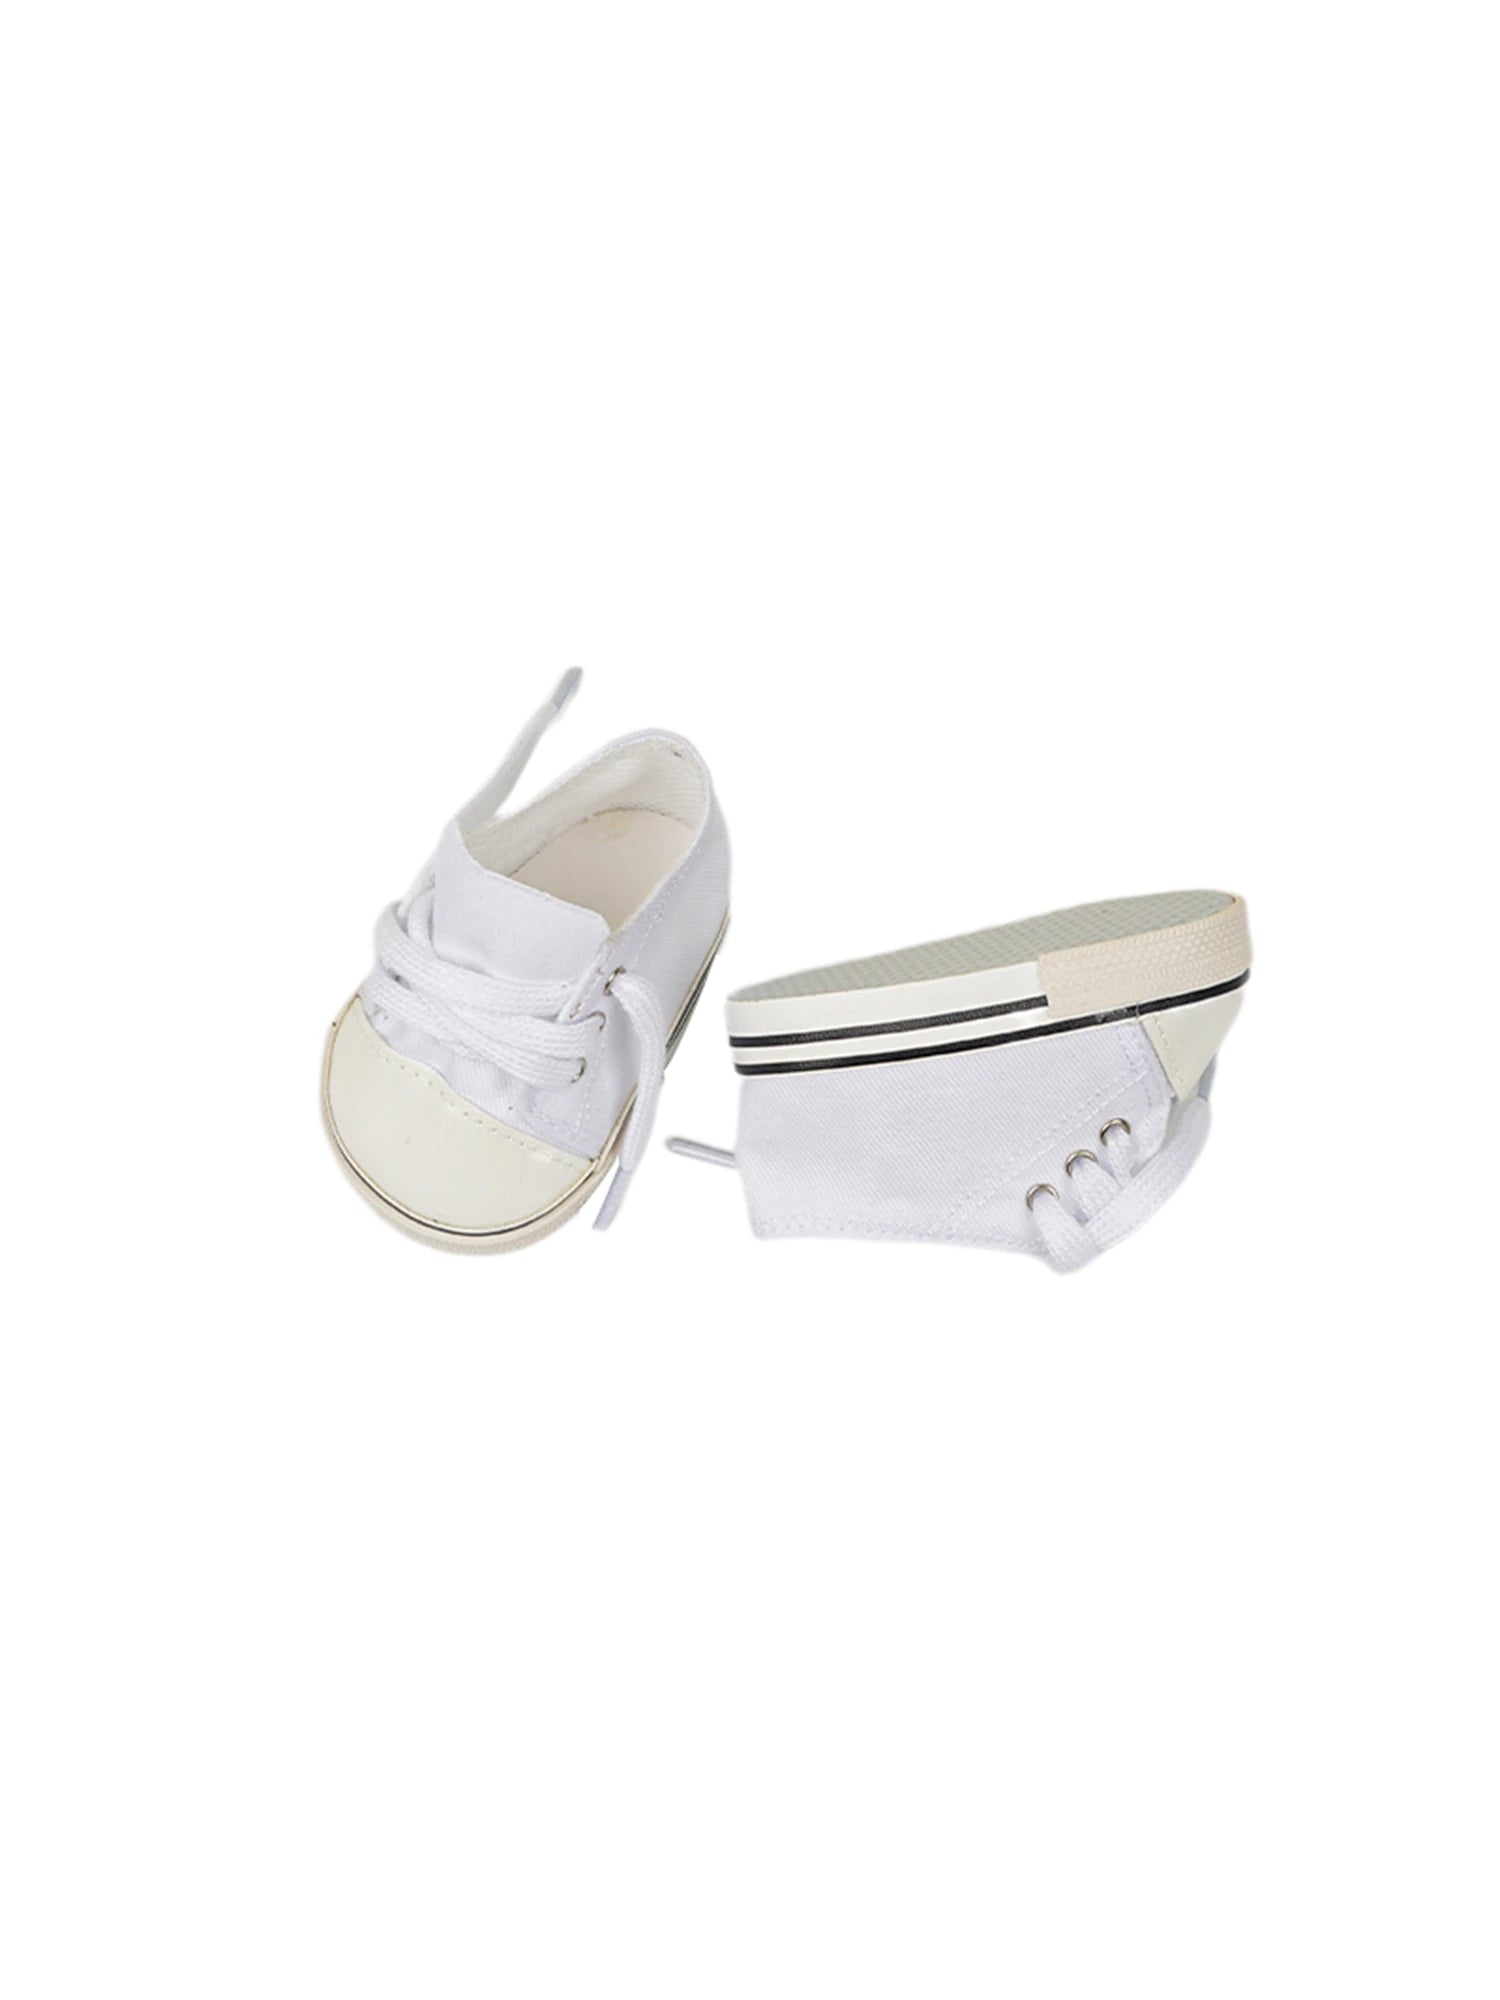 Reborn Doll Shoes